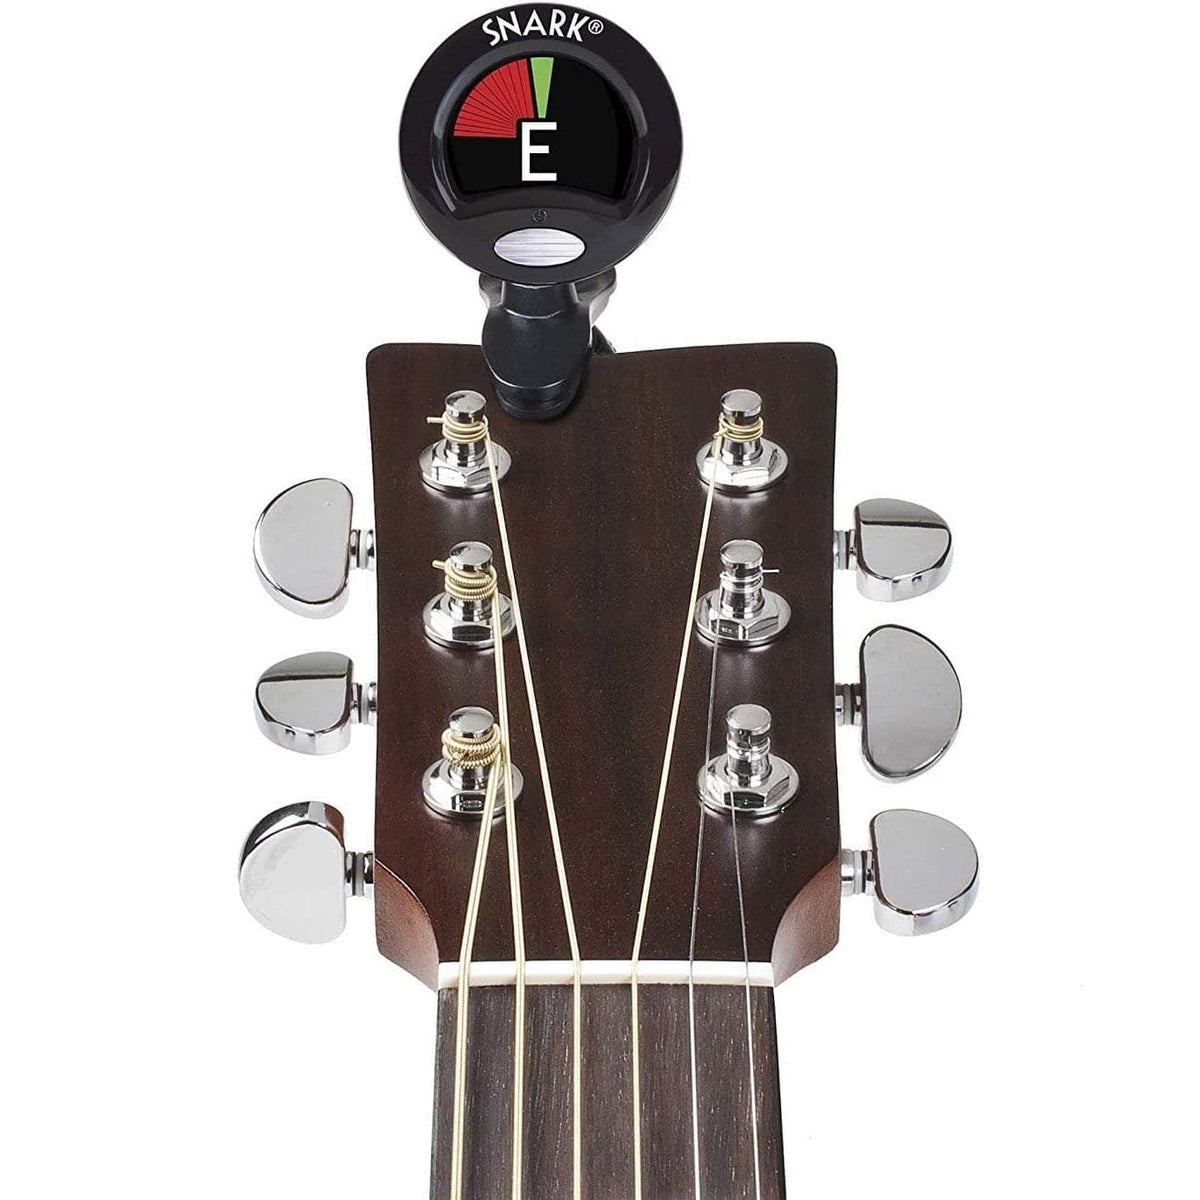 SNARK SN5X Chromatic Tuner for Guitar, Bass, All Instruments - Black